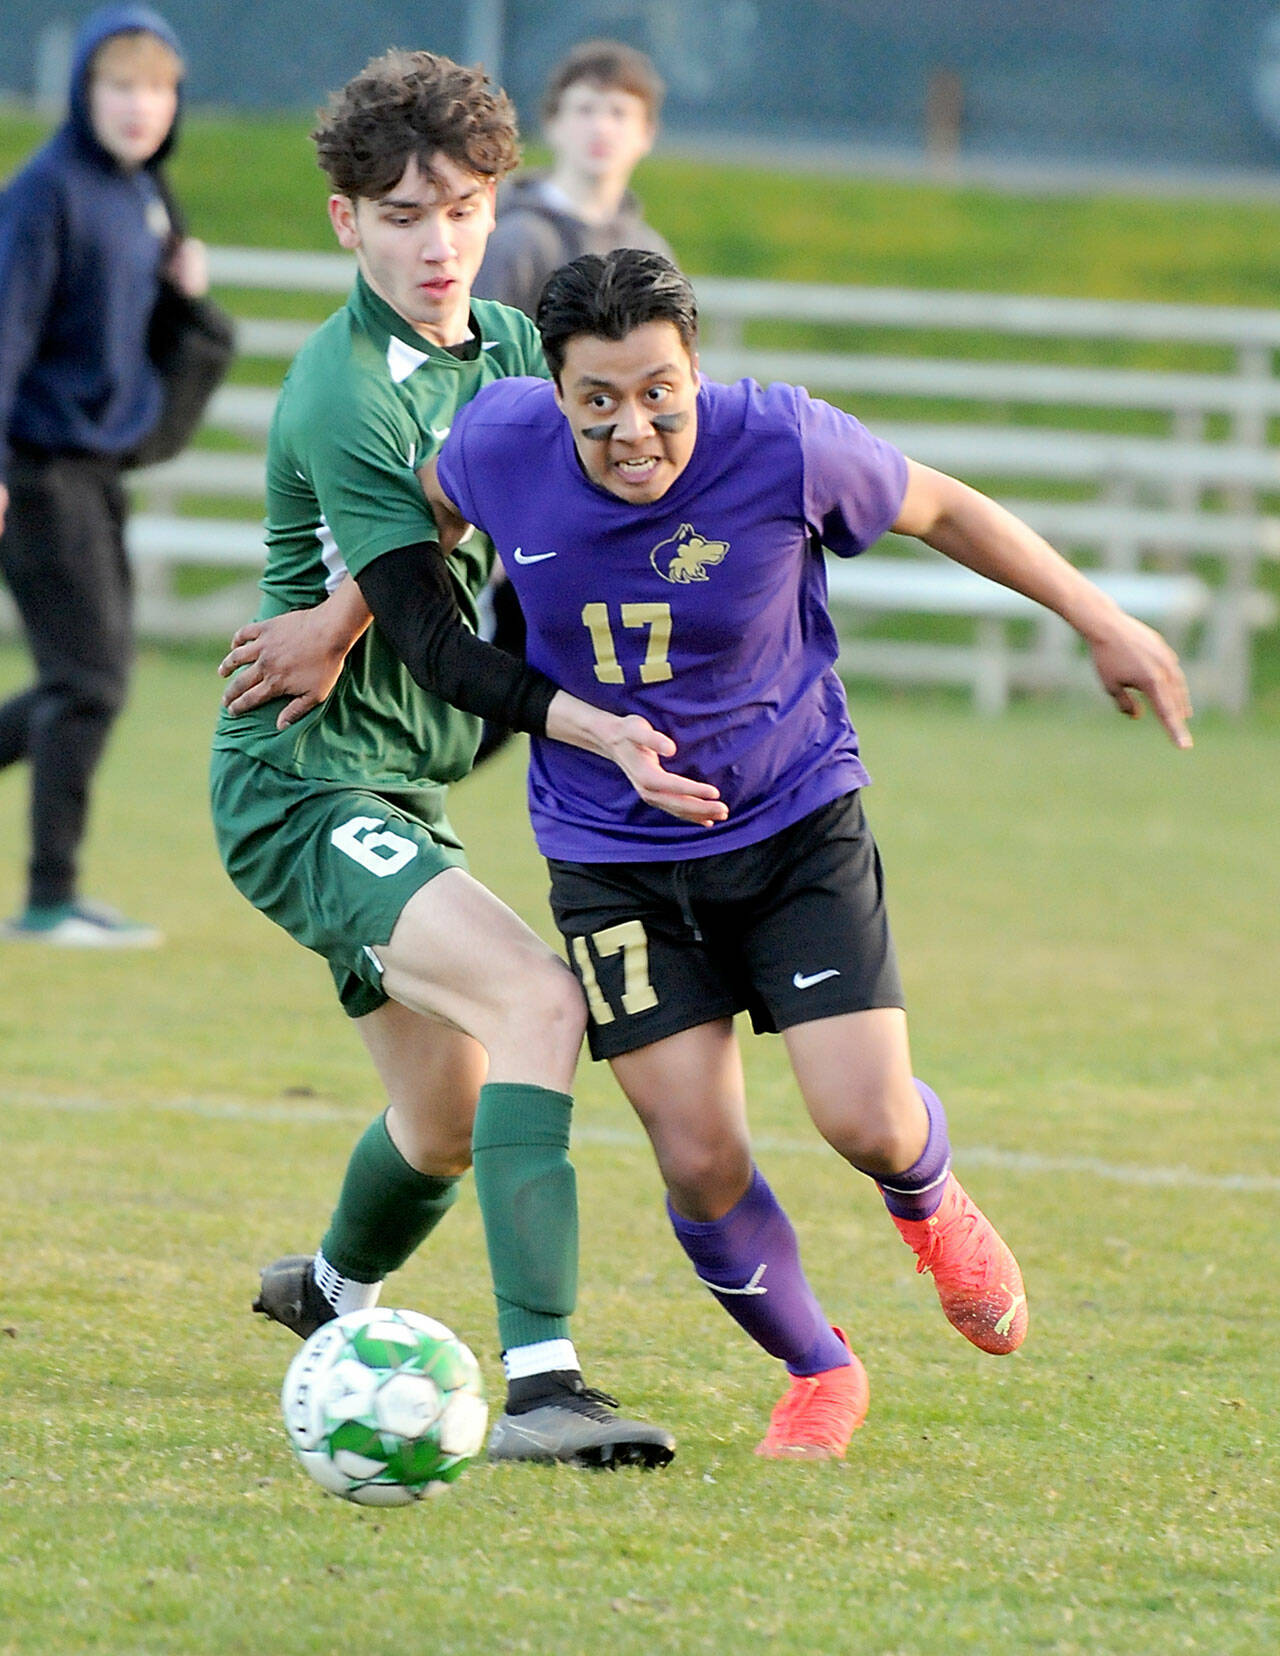 KEITH THORPE/PENINSULA DAILY NEWS Sequim’s Abe Torres, right, and Port Angeles’ Keane McClain spar for the ball during Thursday night’s match at Port Angeles Civic Field.